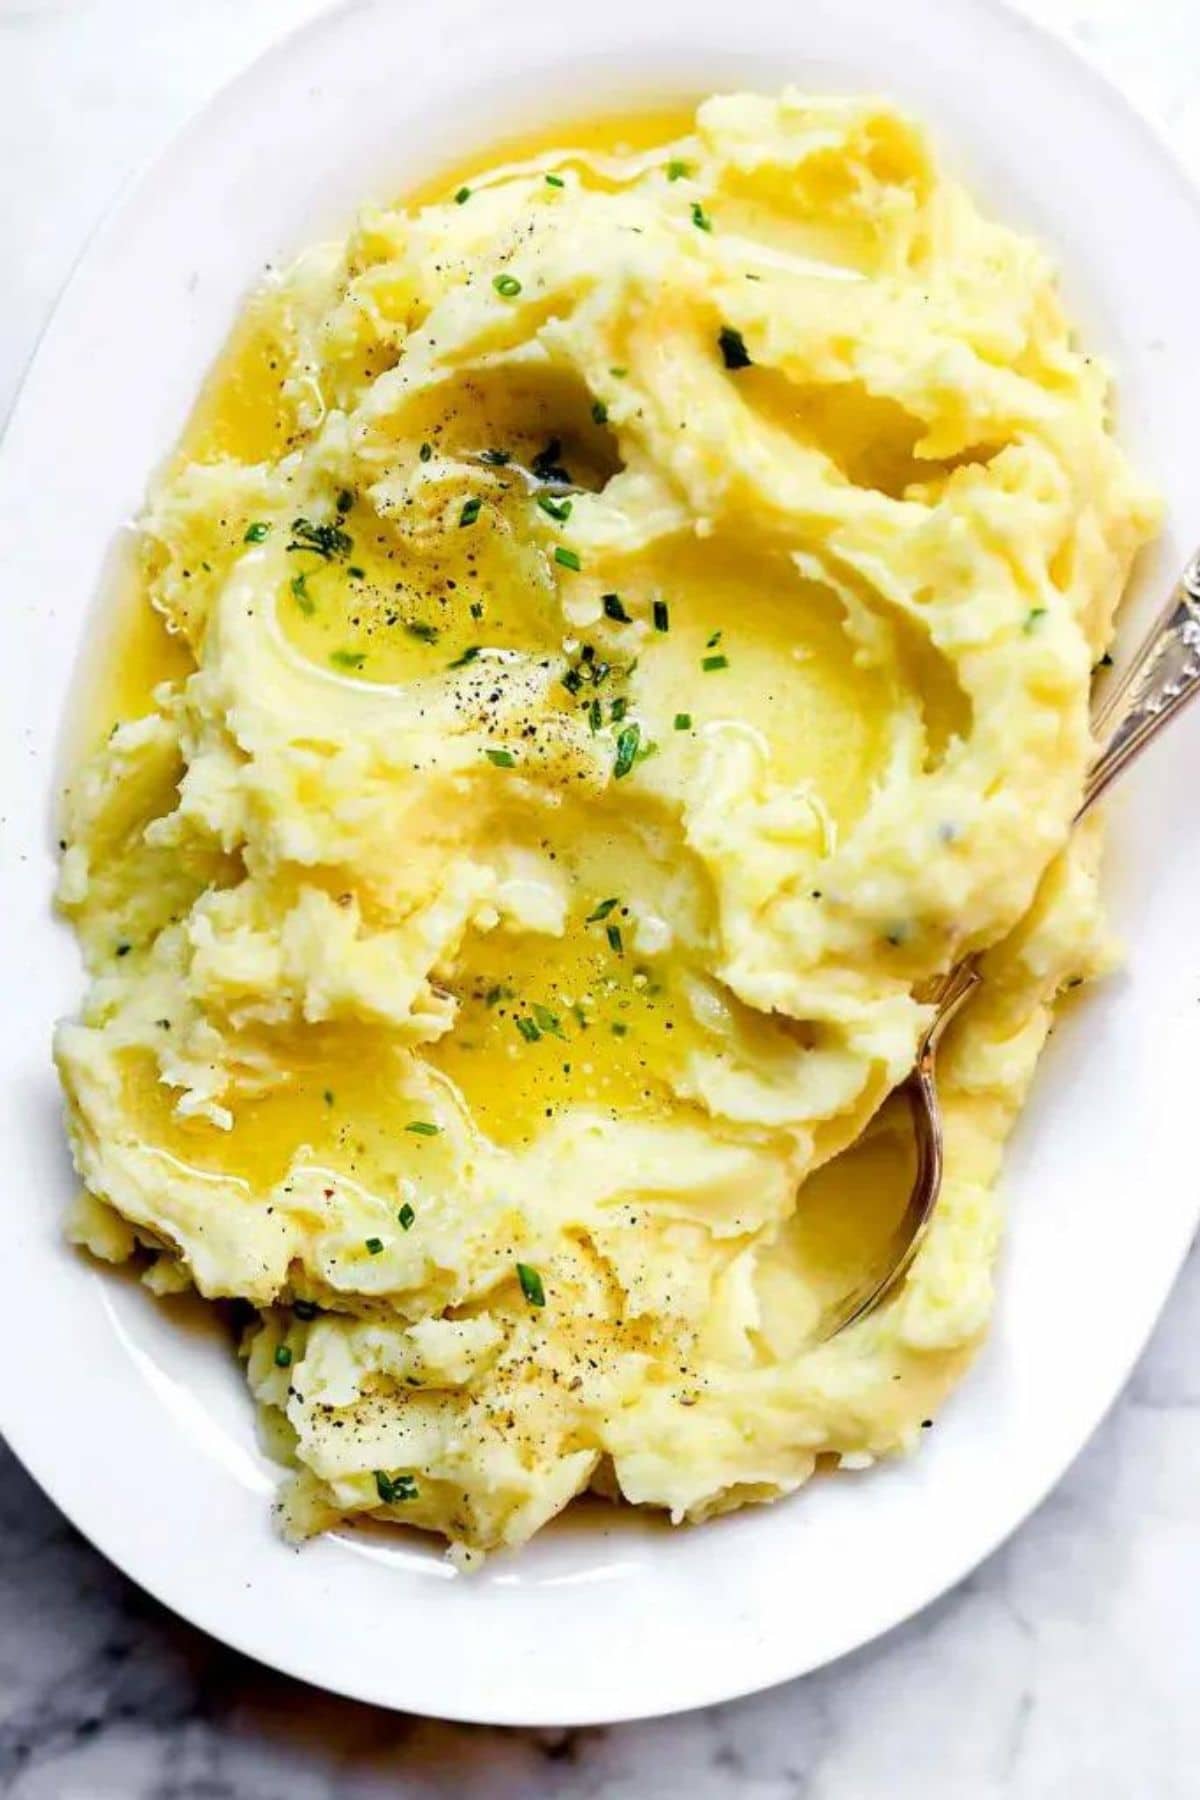 mashed potatoes topped with chives in large oval white bowl